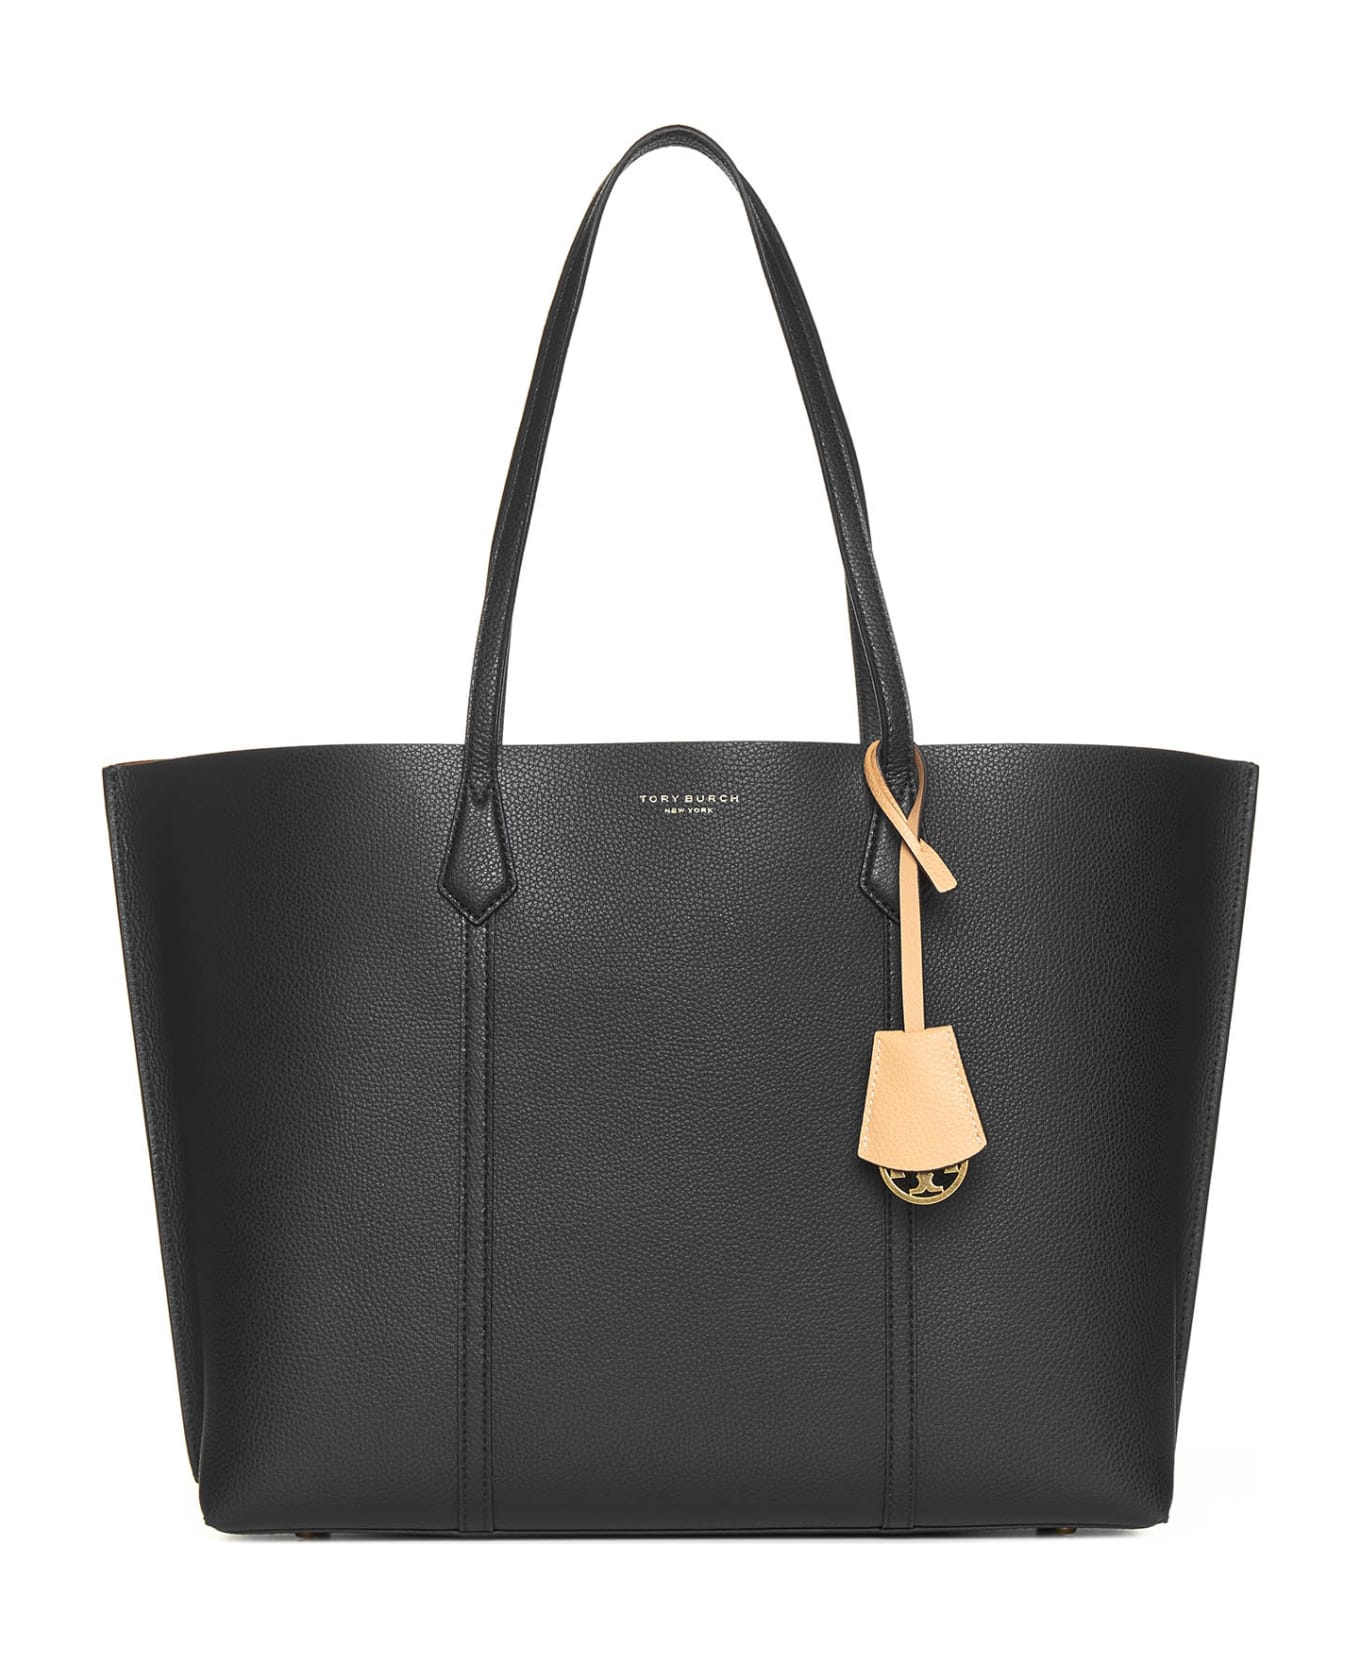 Tory Burch Perry Triple Compartment Tote Bag - black